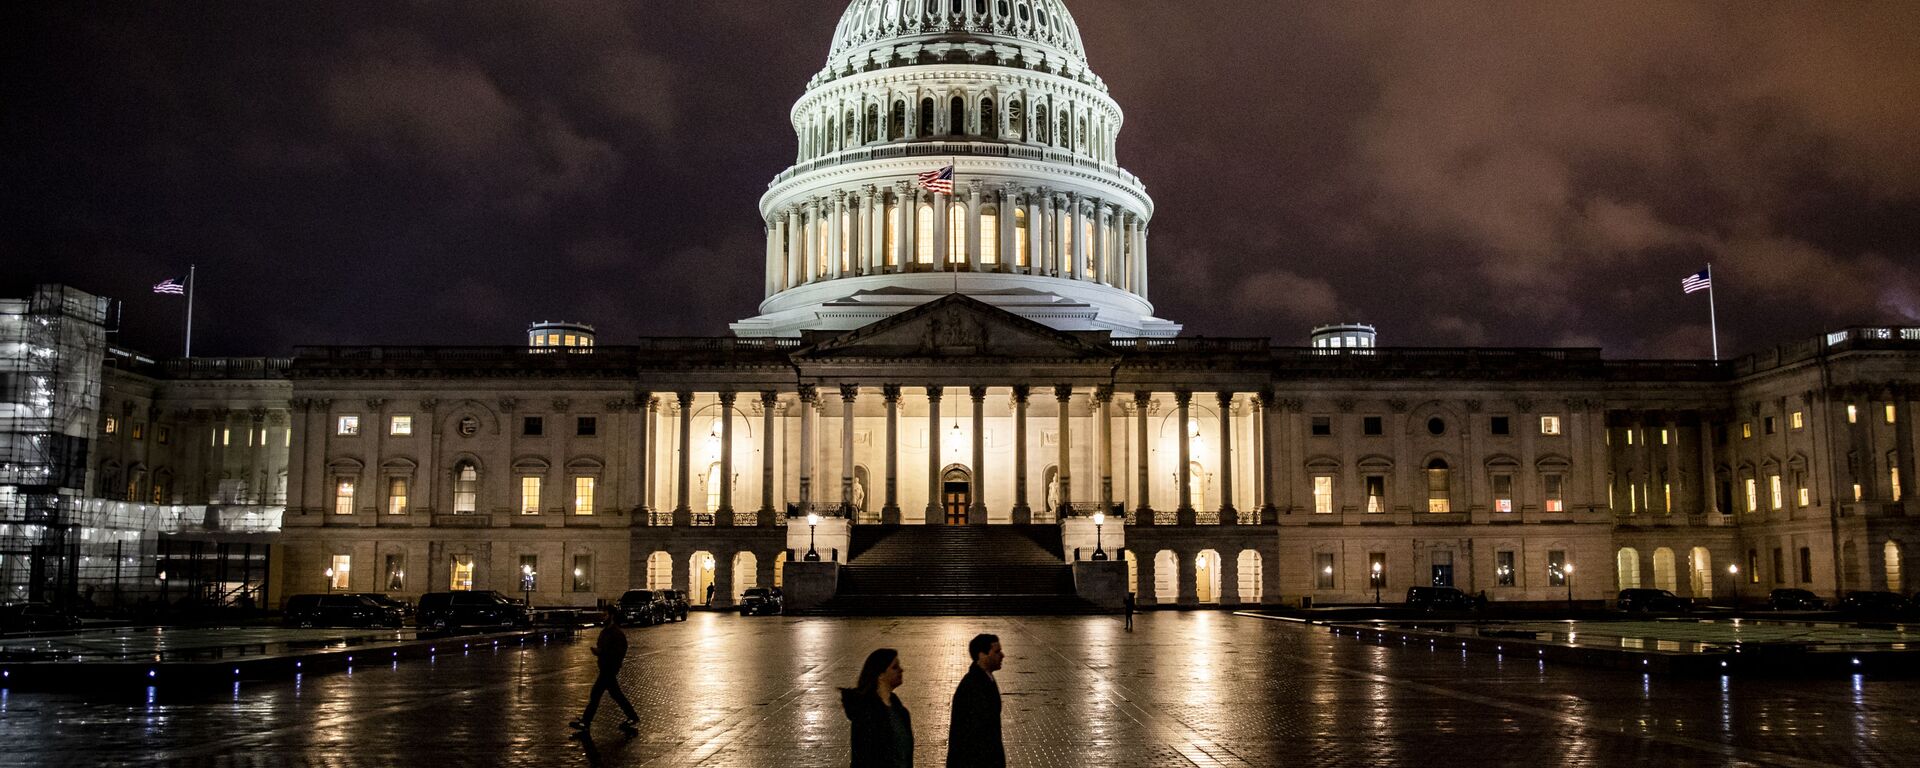 People walk along the east front plaza of the US Capitol as night falls on December 17, 2019 in Washington, DC - Sputnik International, 1920, 30.09.2021